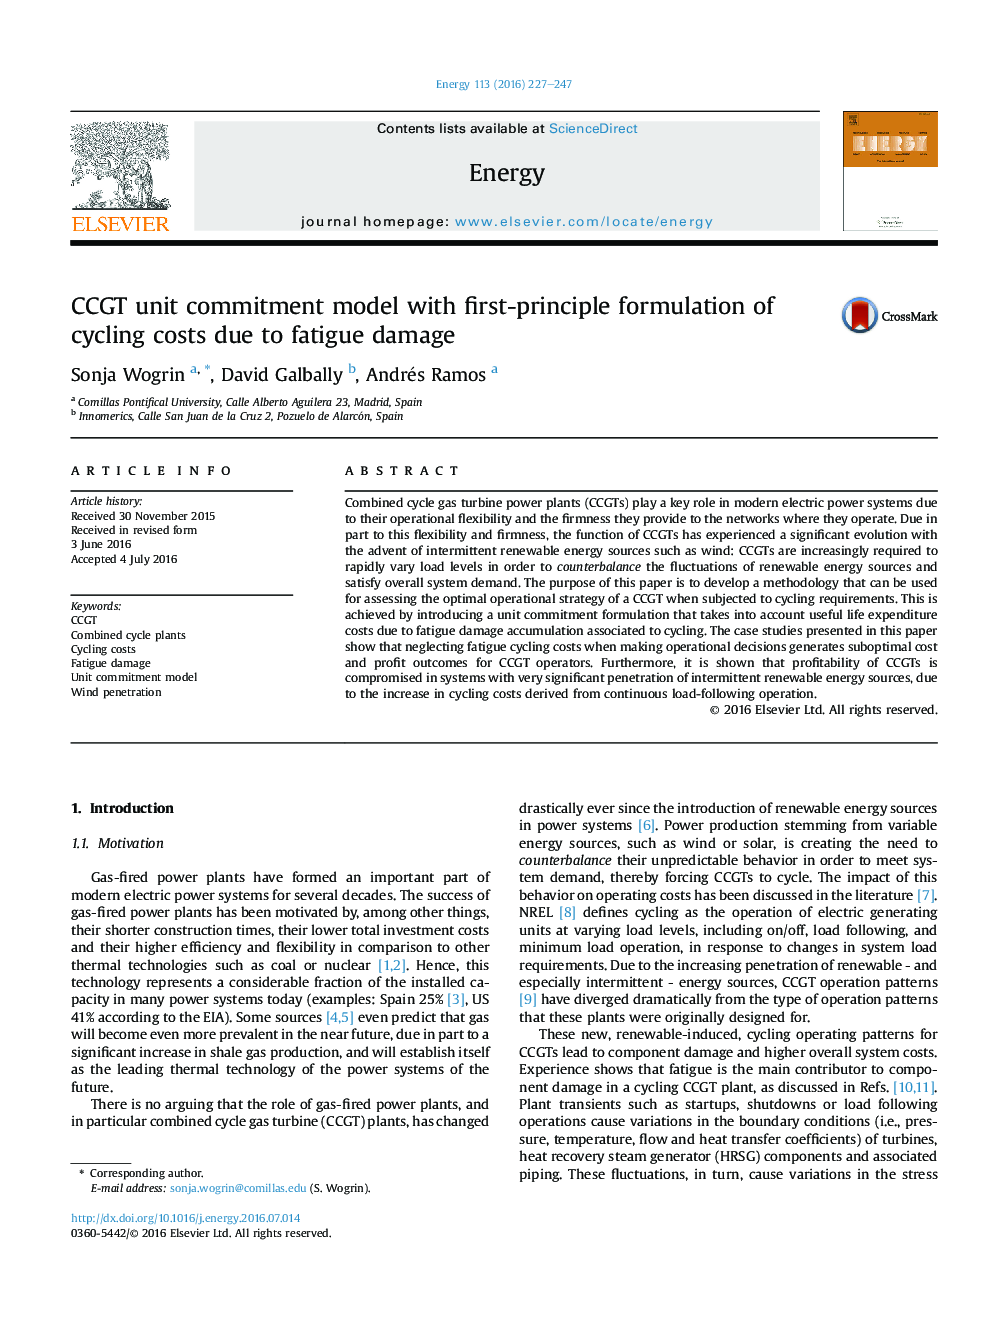 CCGT unit commitment model with first-principle formulation of cycling costs due to fatigue damage